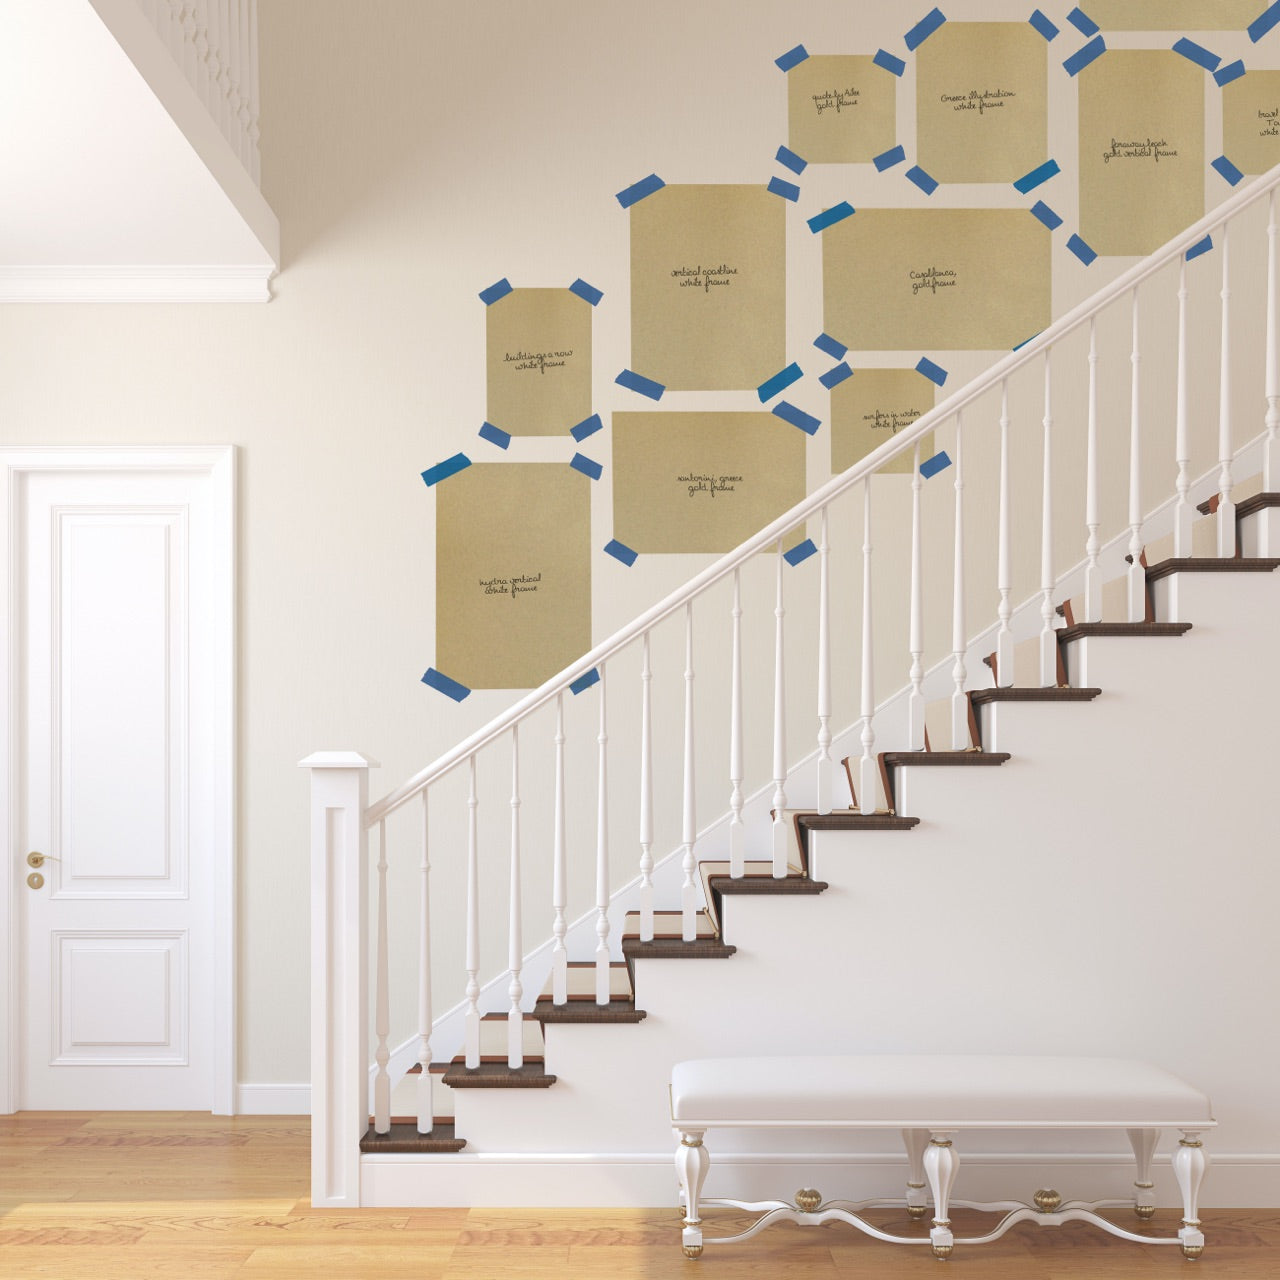 layout-staircase-gallery-wall-template